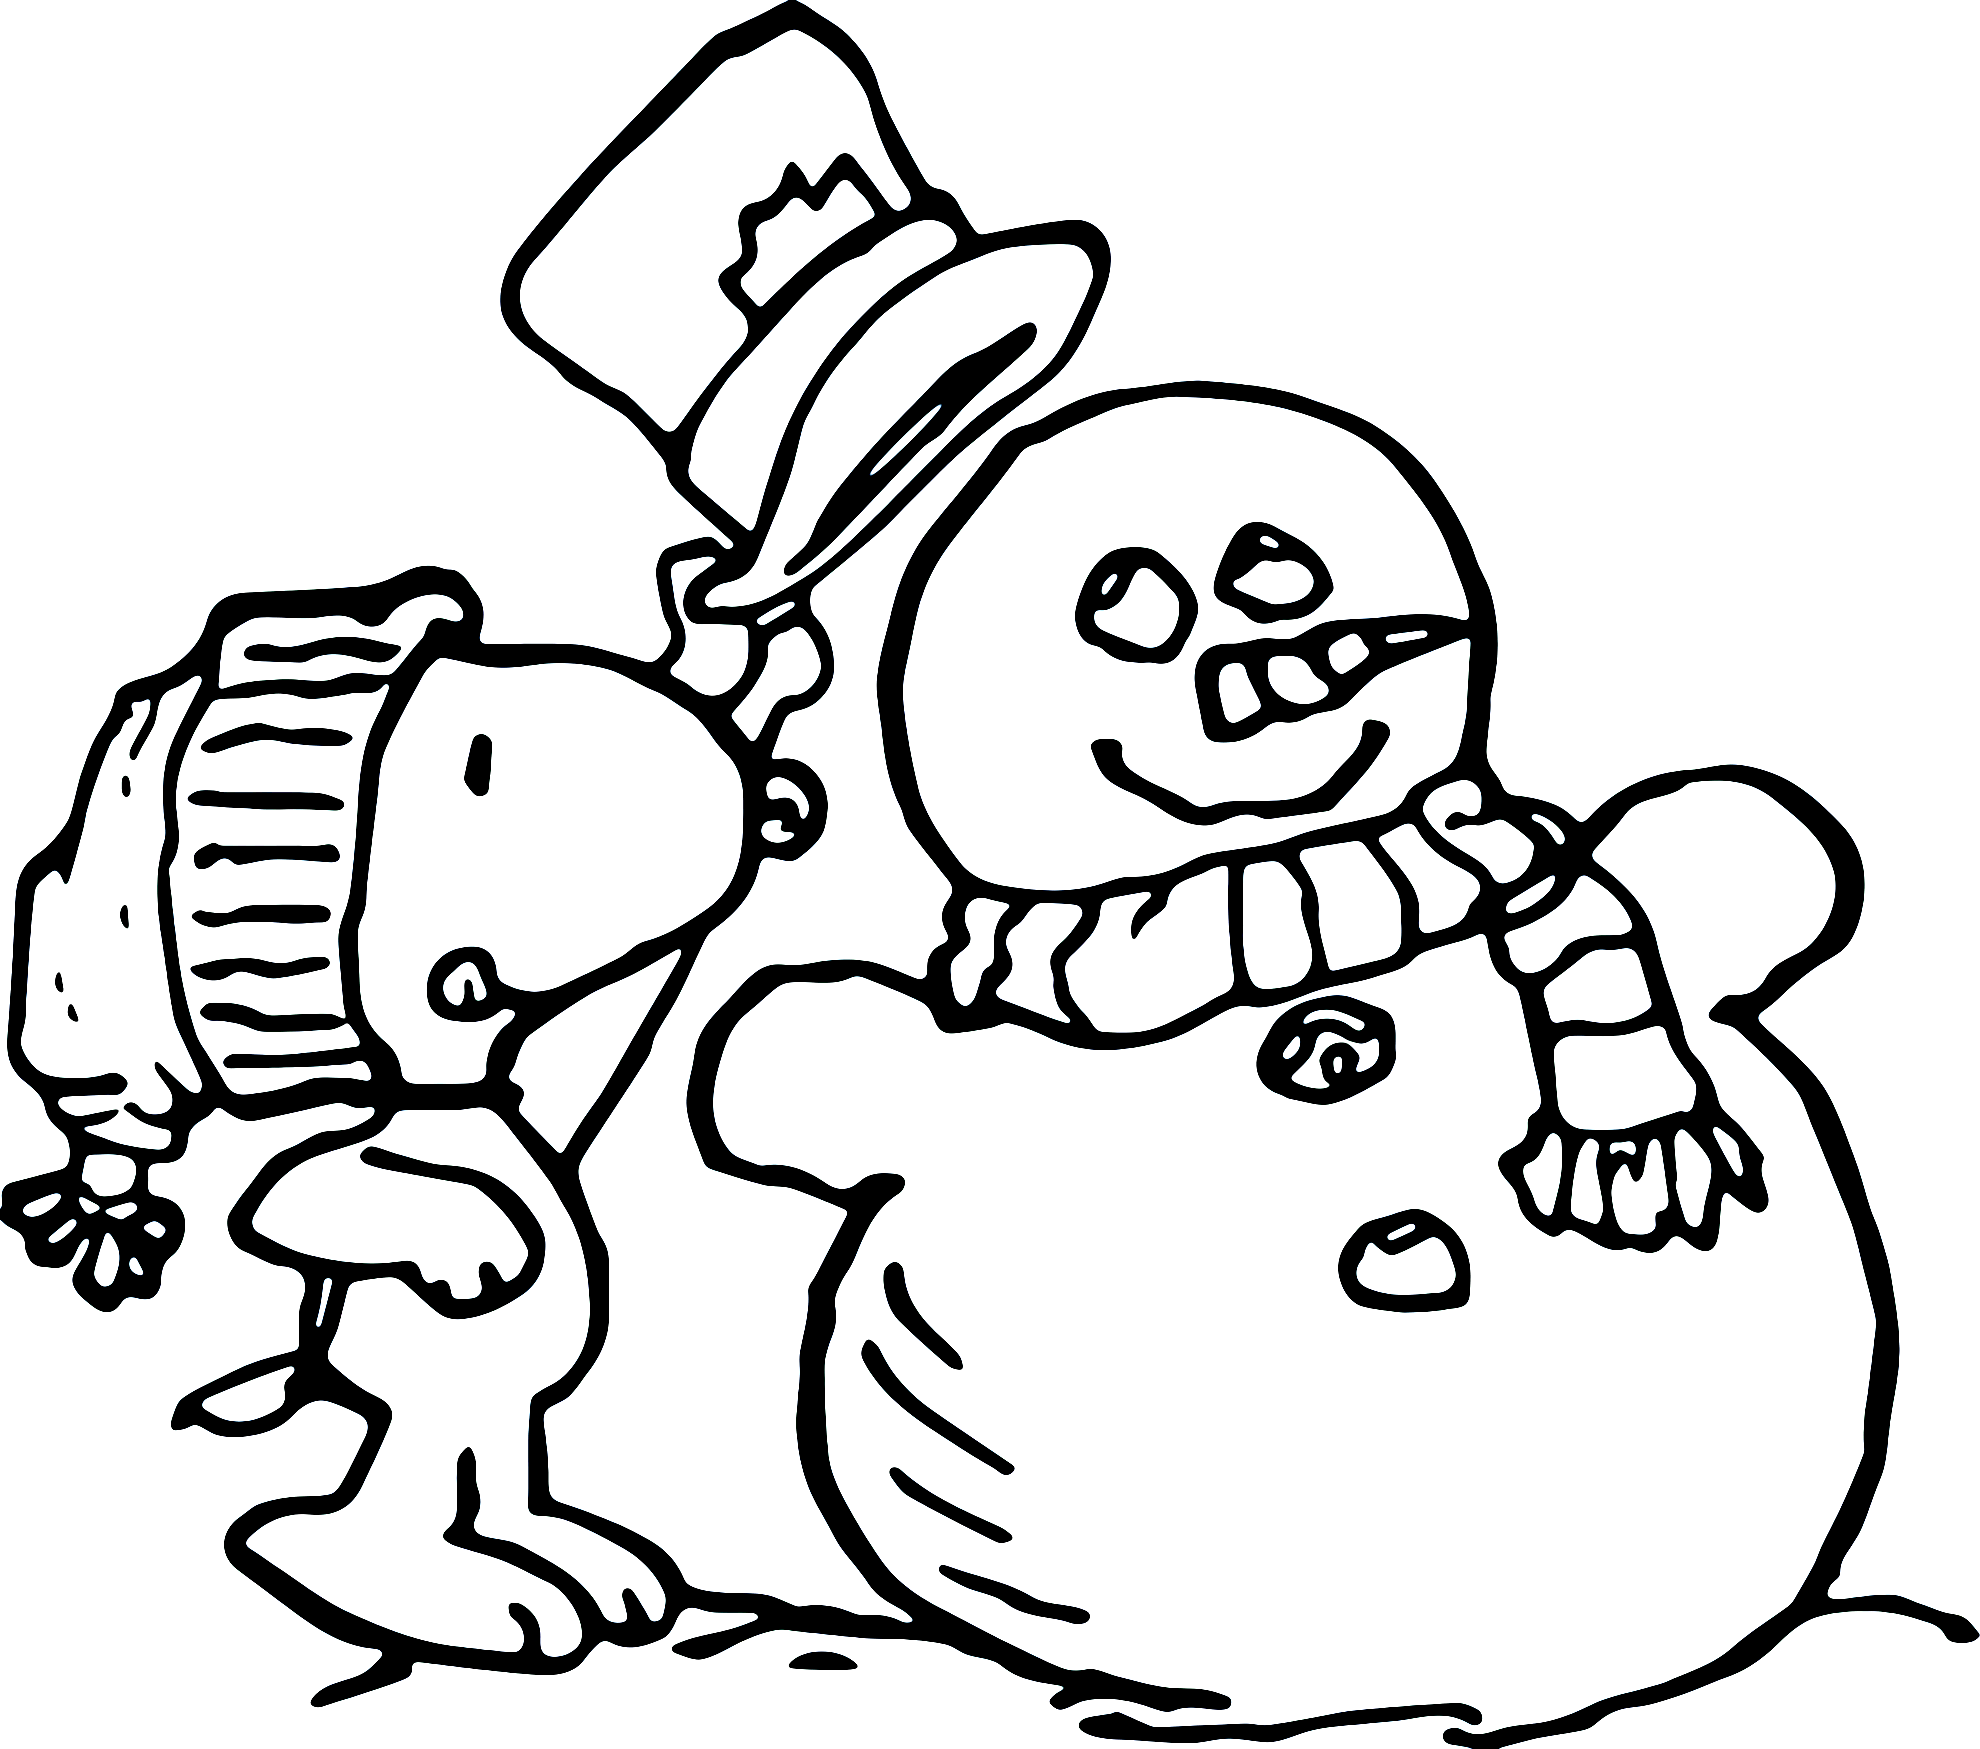 Coloring Page of Snoopy Dog with Christmas Snowman